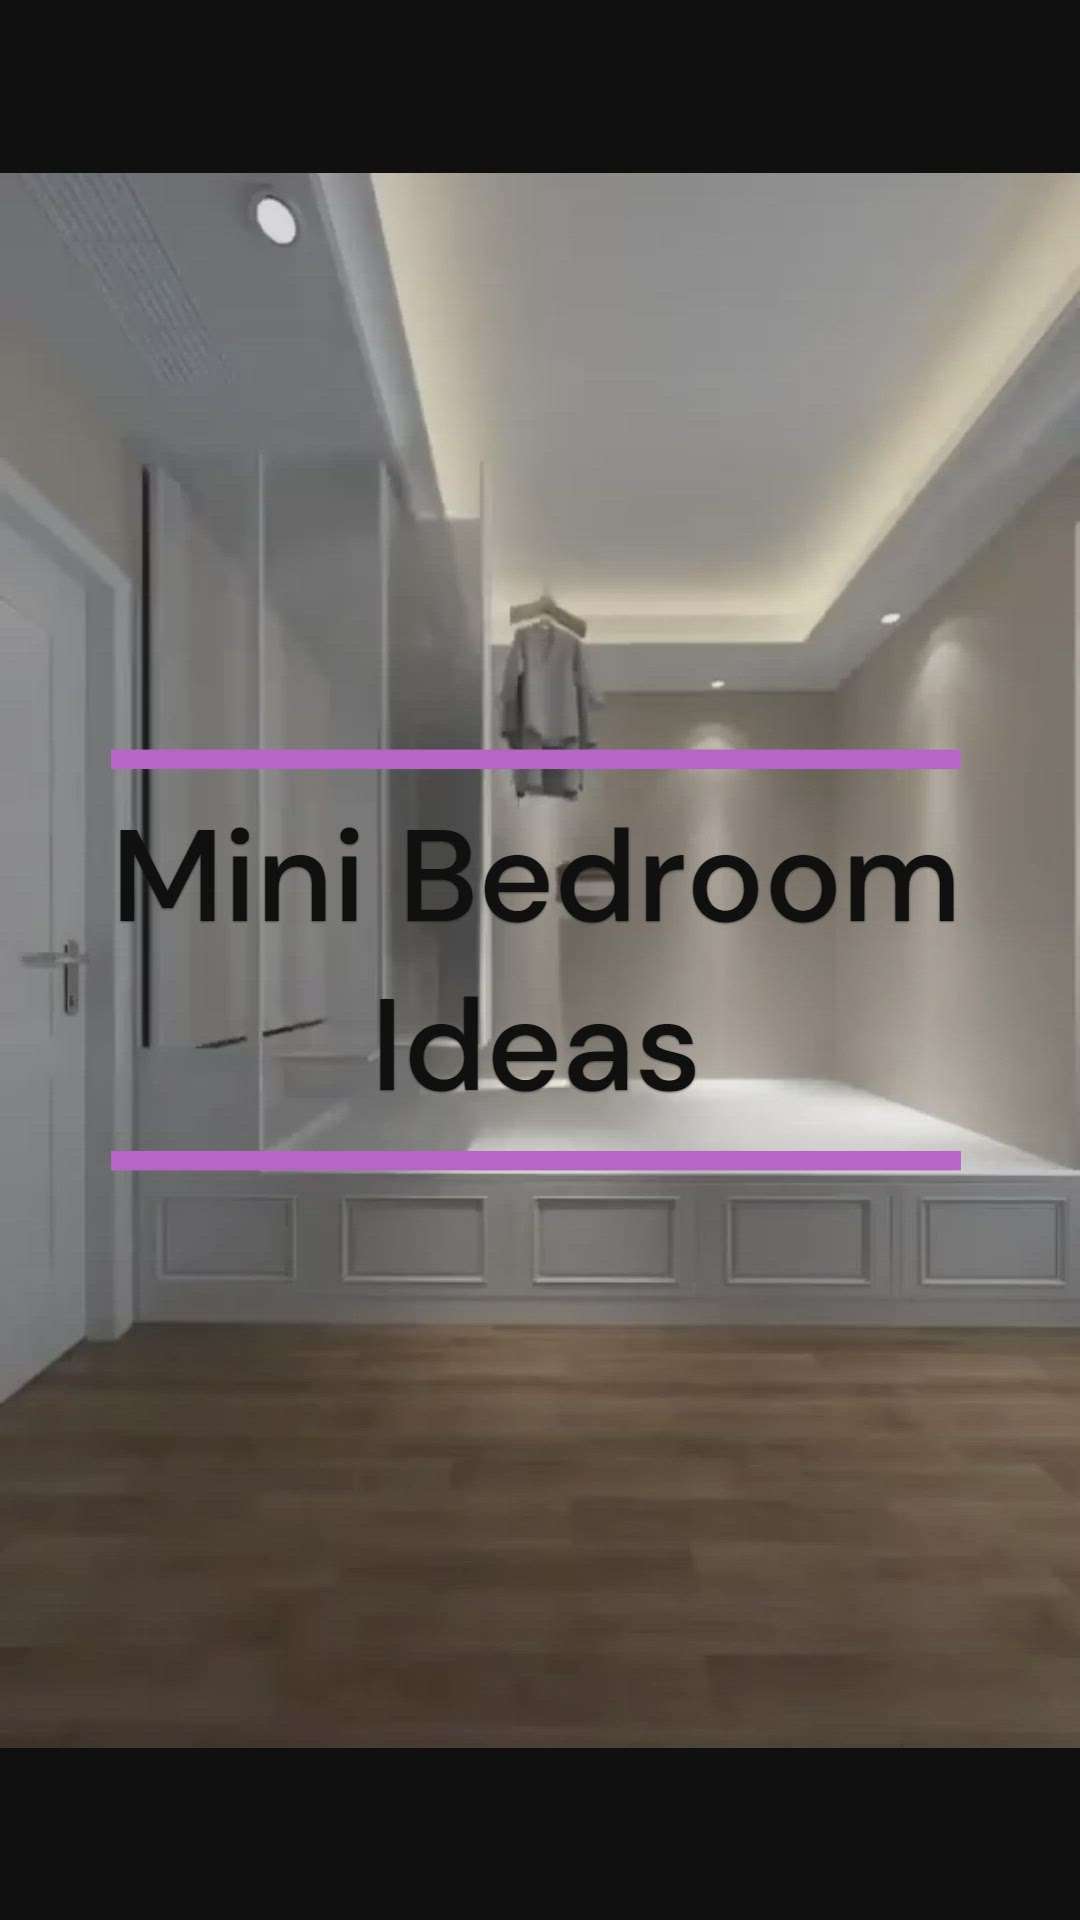 Transform your space with these charming mini bedroom ideas! #BedroomDecor #InteriorDesigner